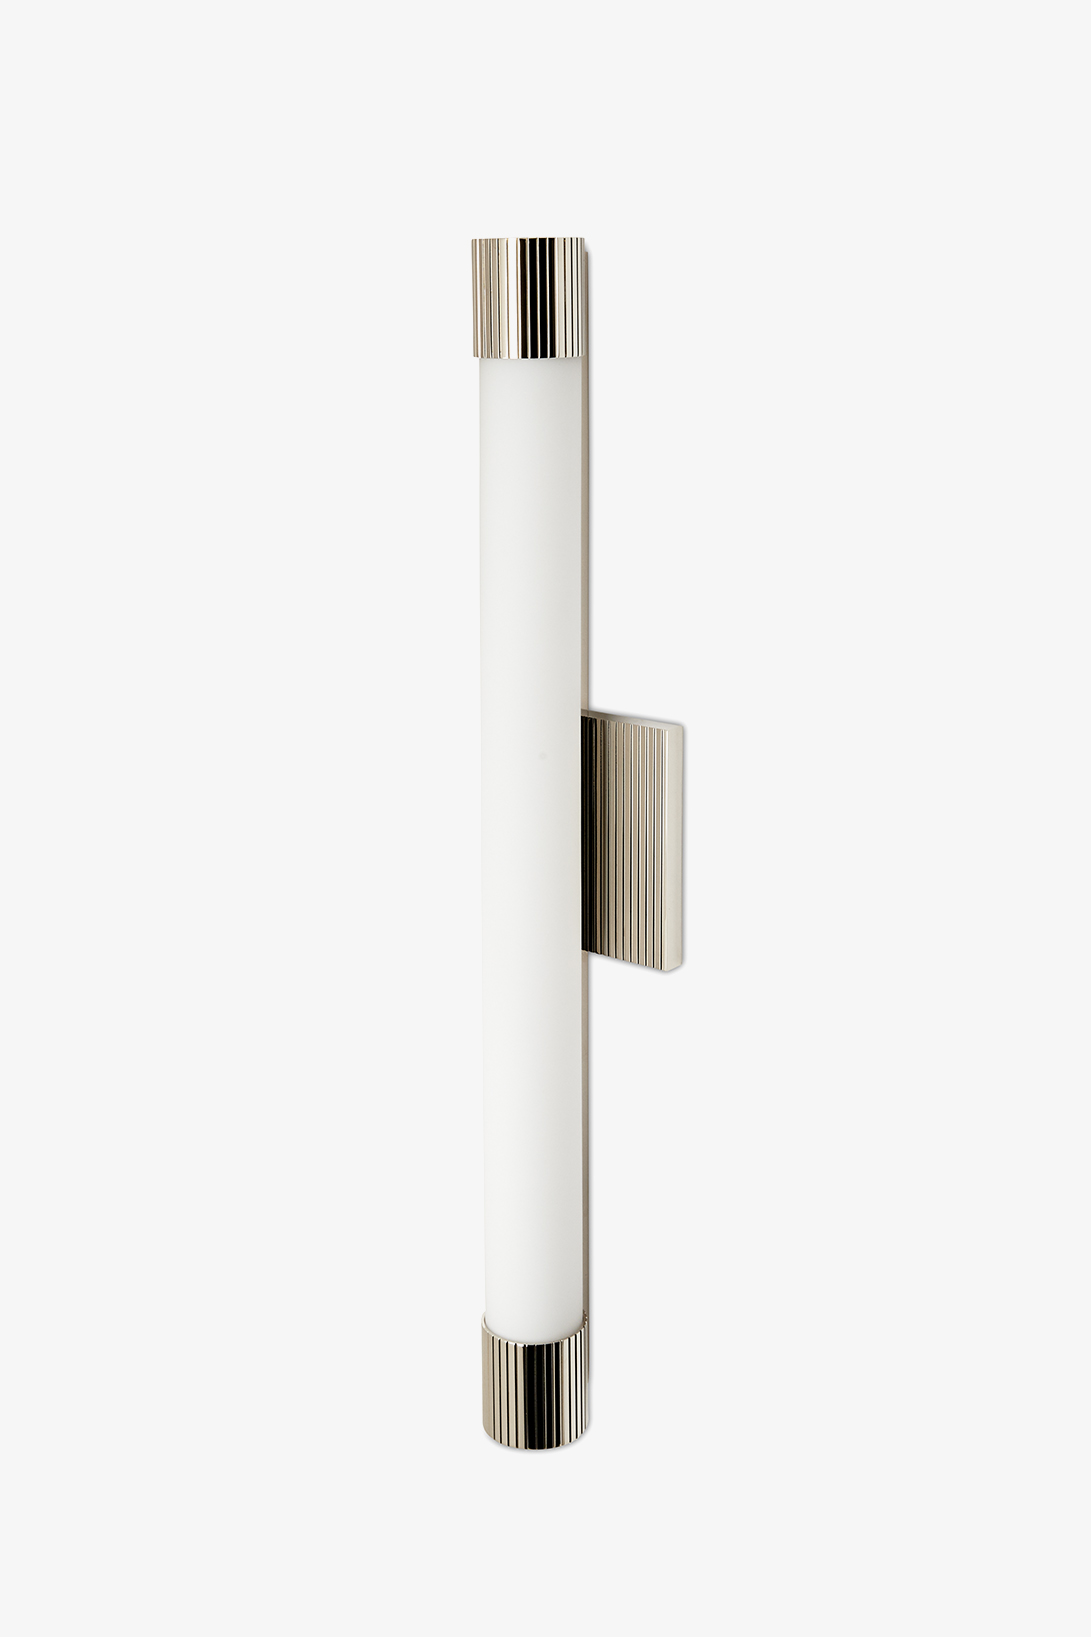 Costine Wall Mounted Bar Sconce